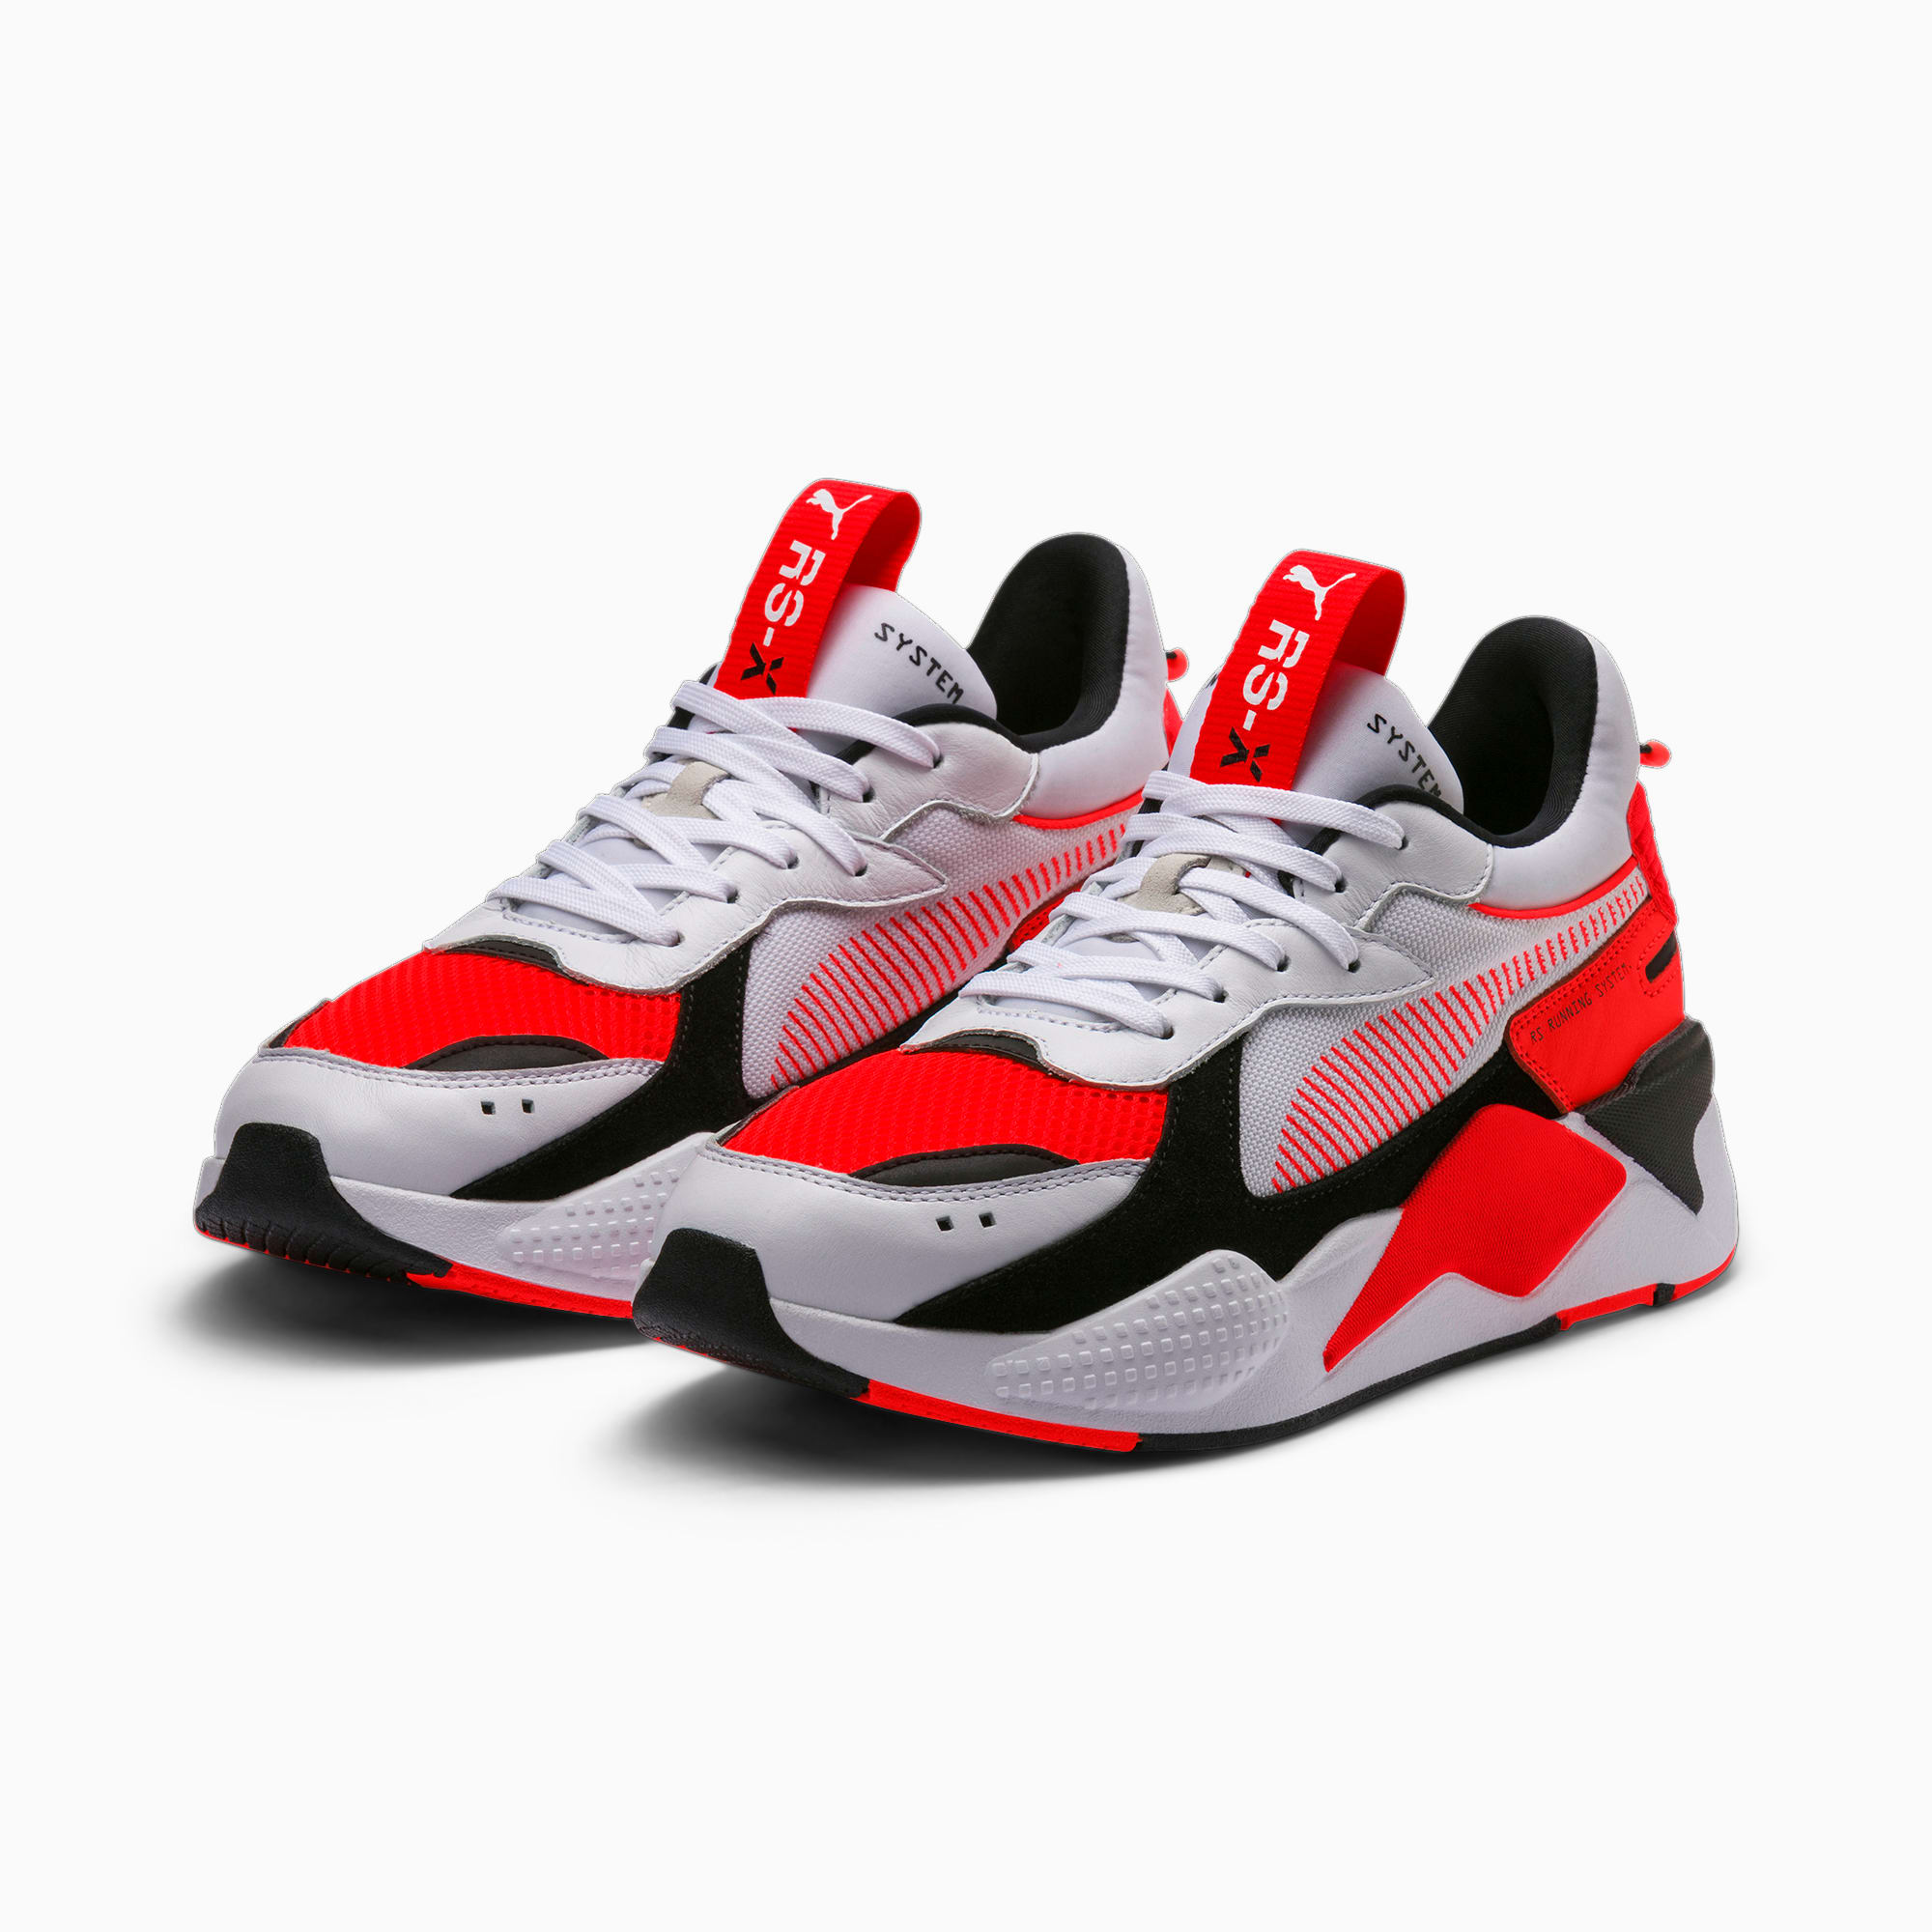 PUMA RS-X REINVENTION 369579-13 BLACK/RED MEN'S RUNNING SHOES TRAINING  SNEAKERS